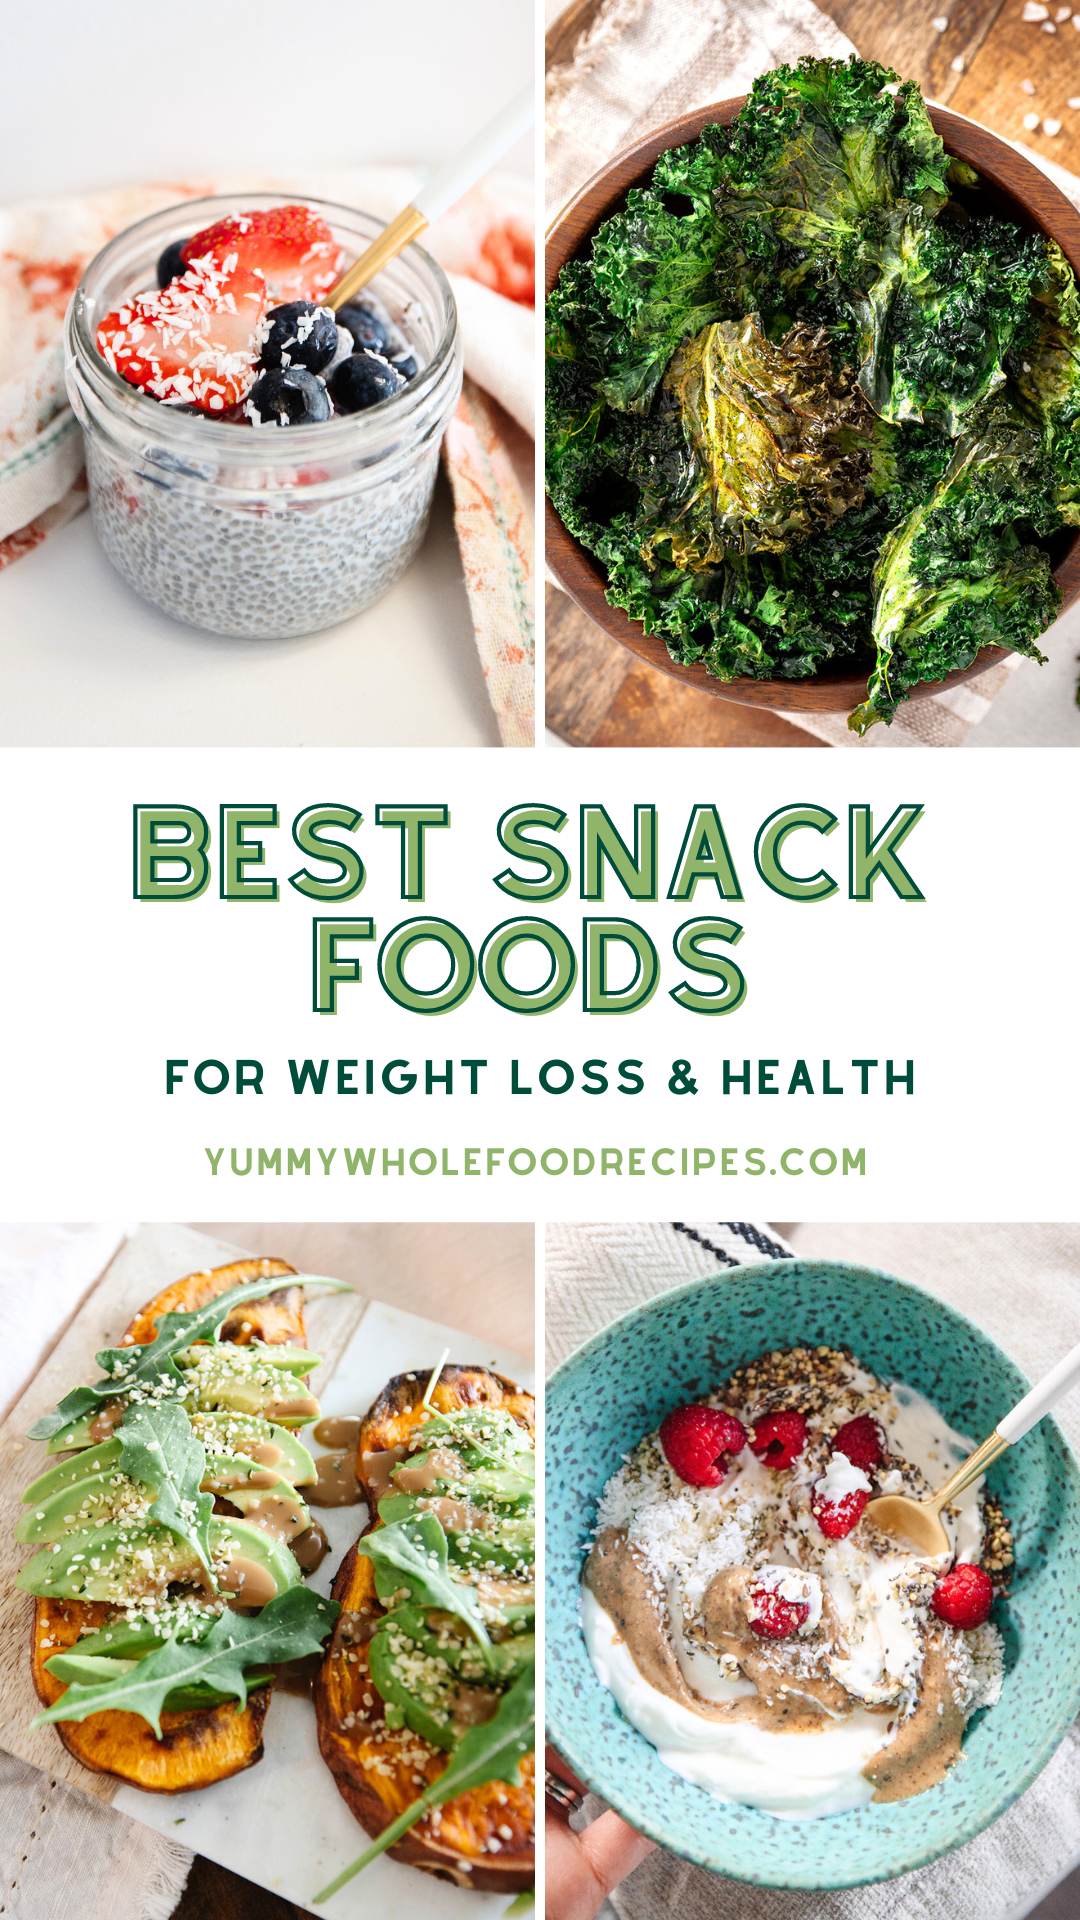 Best Snack Foods for Weight Loss (+ for simply feeling good!)